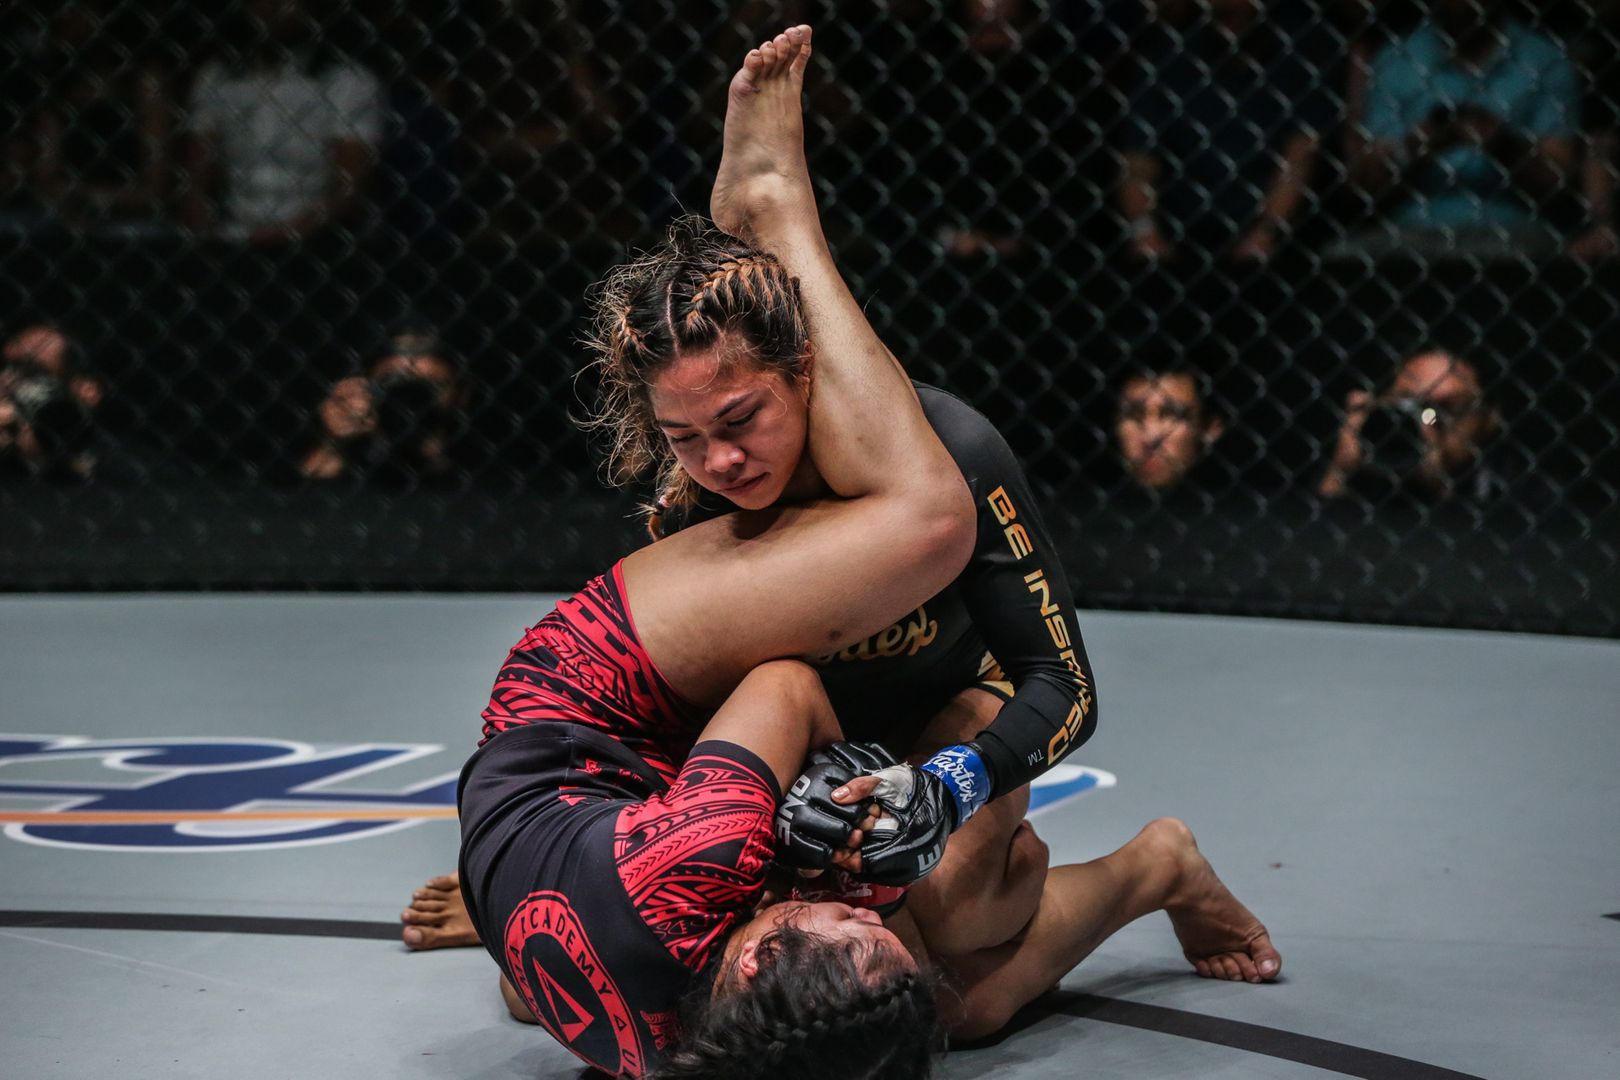 Denice Zamboanga vs Angela Lee after ‘ONE: King of the Jungle’ in Singapore?